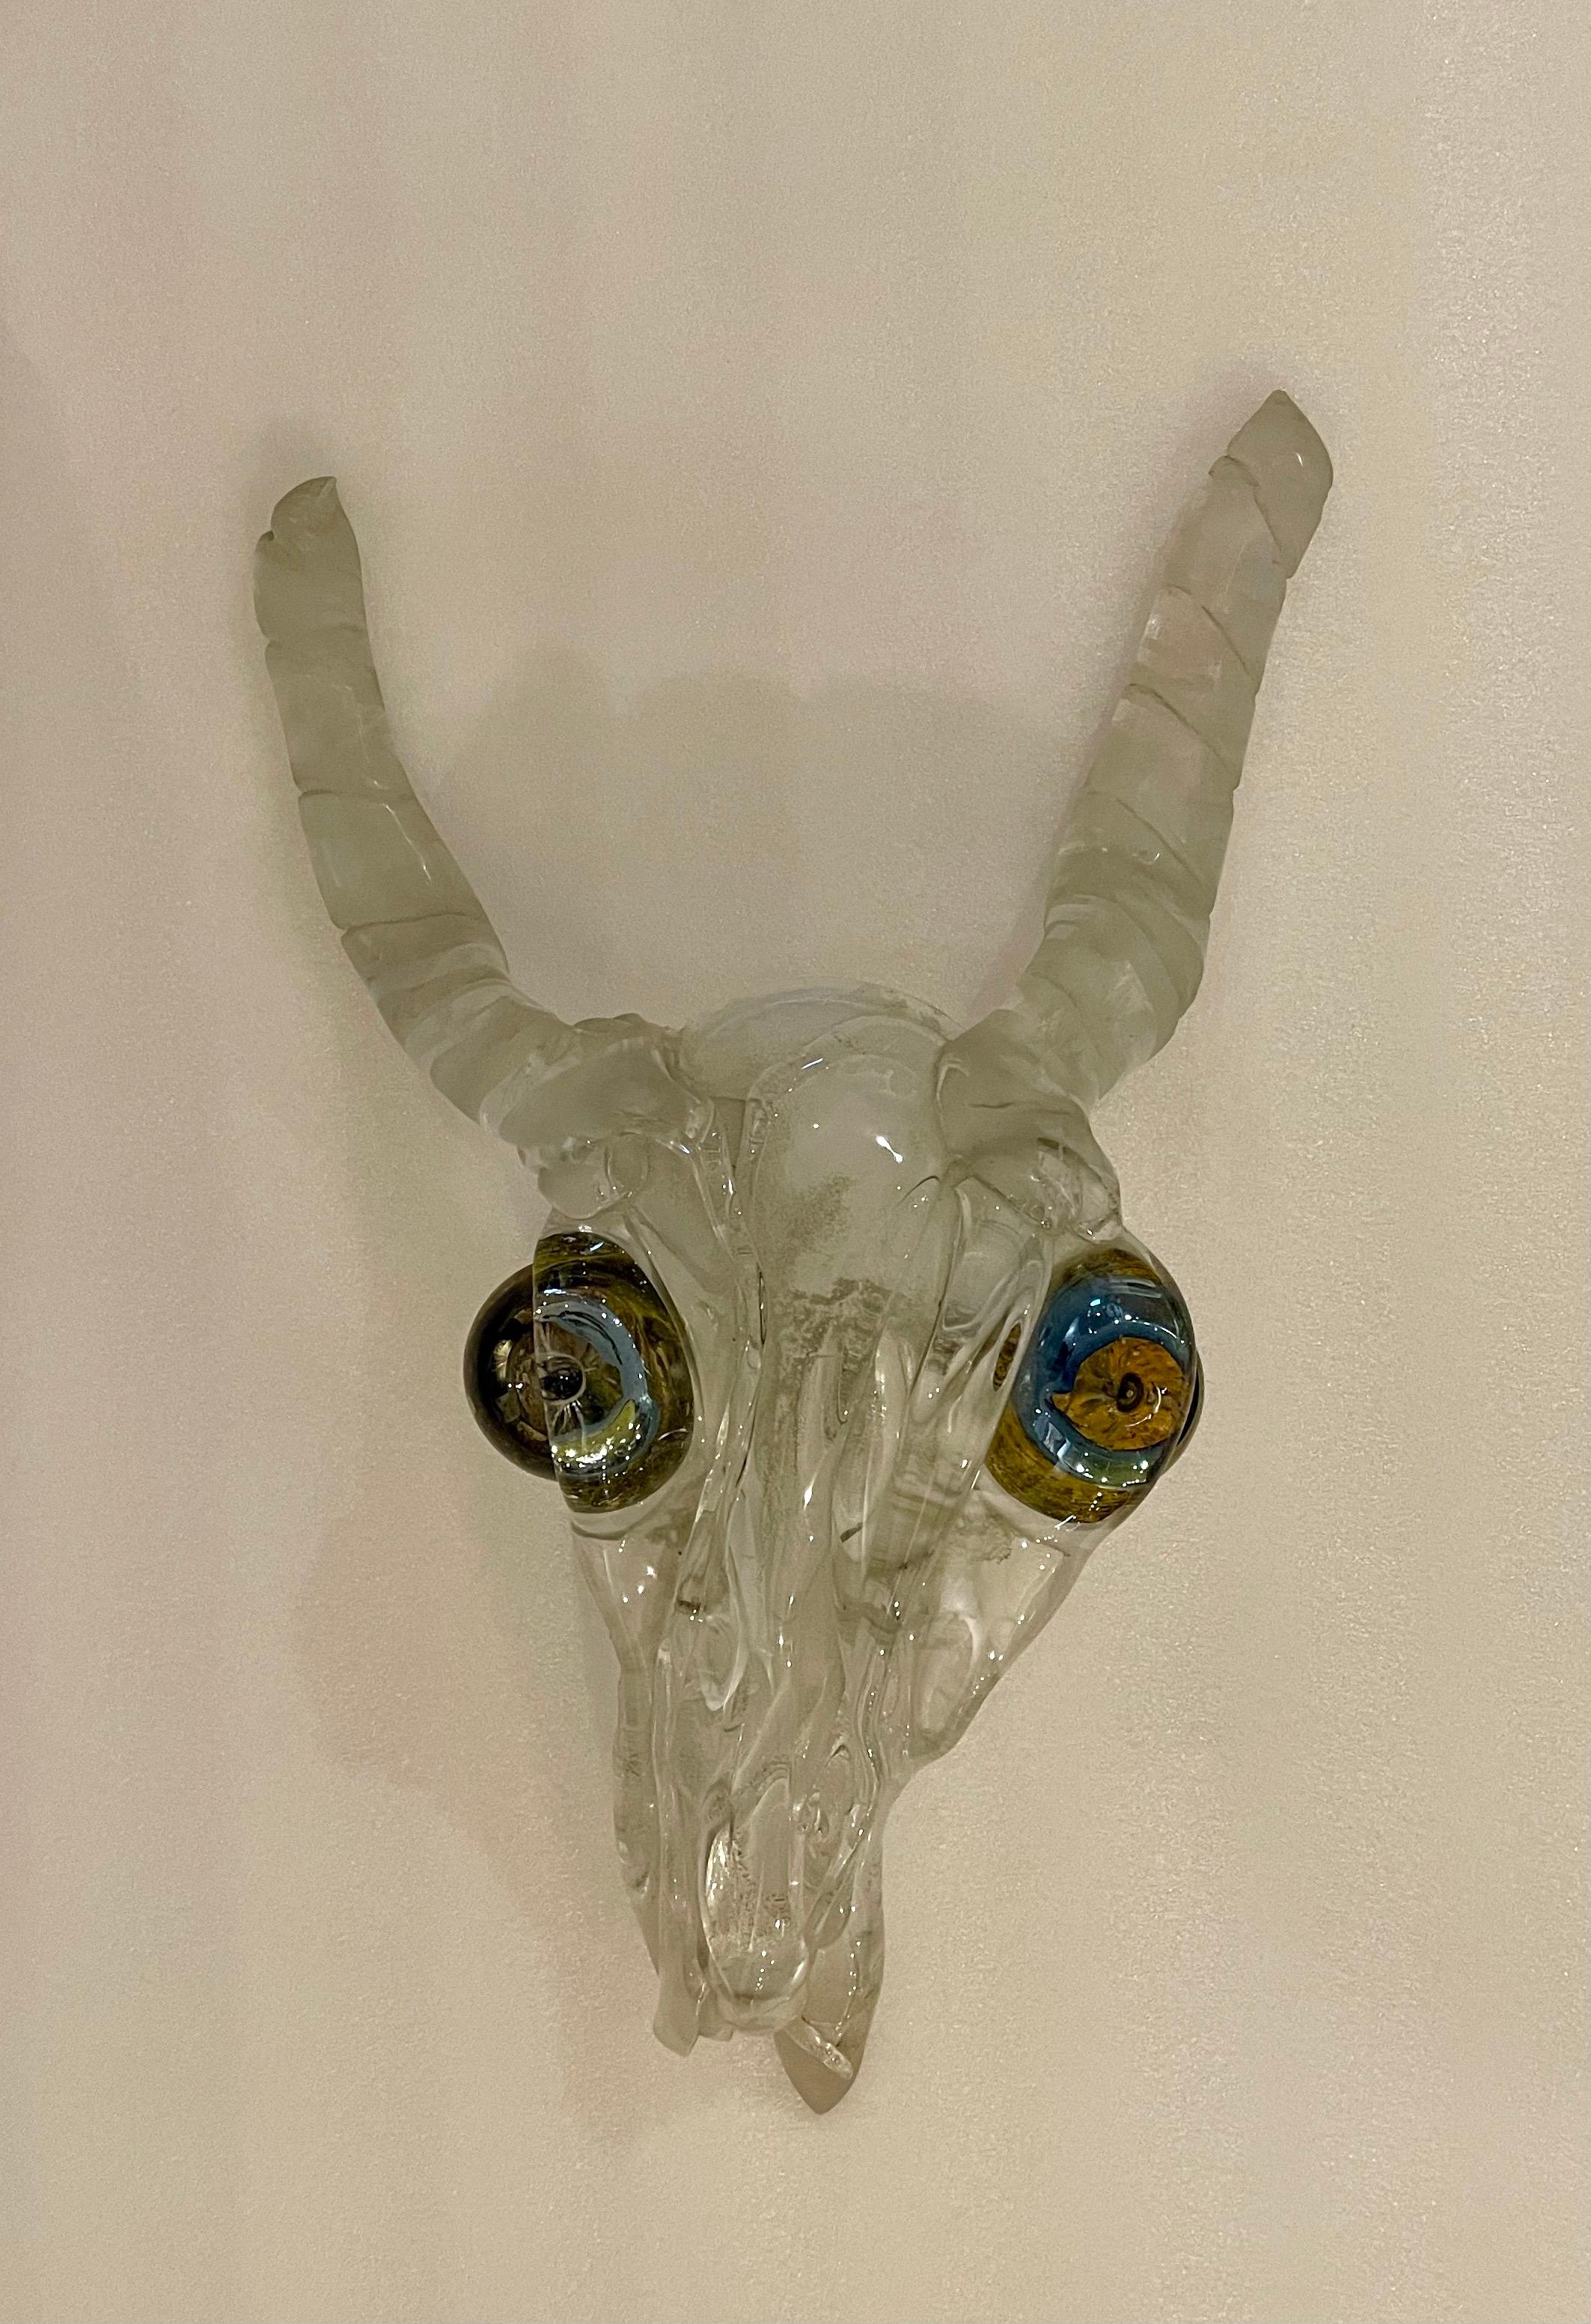 Incredible rare abstract brutal glass wall sculpture, antelope animal with eyes popping out of the skull in blown glass, a very rare and unique piece. circa 1980s.